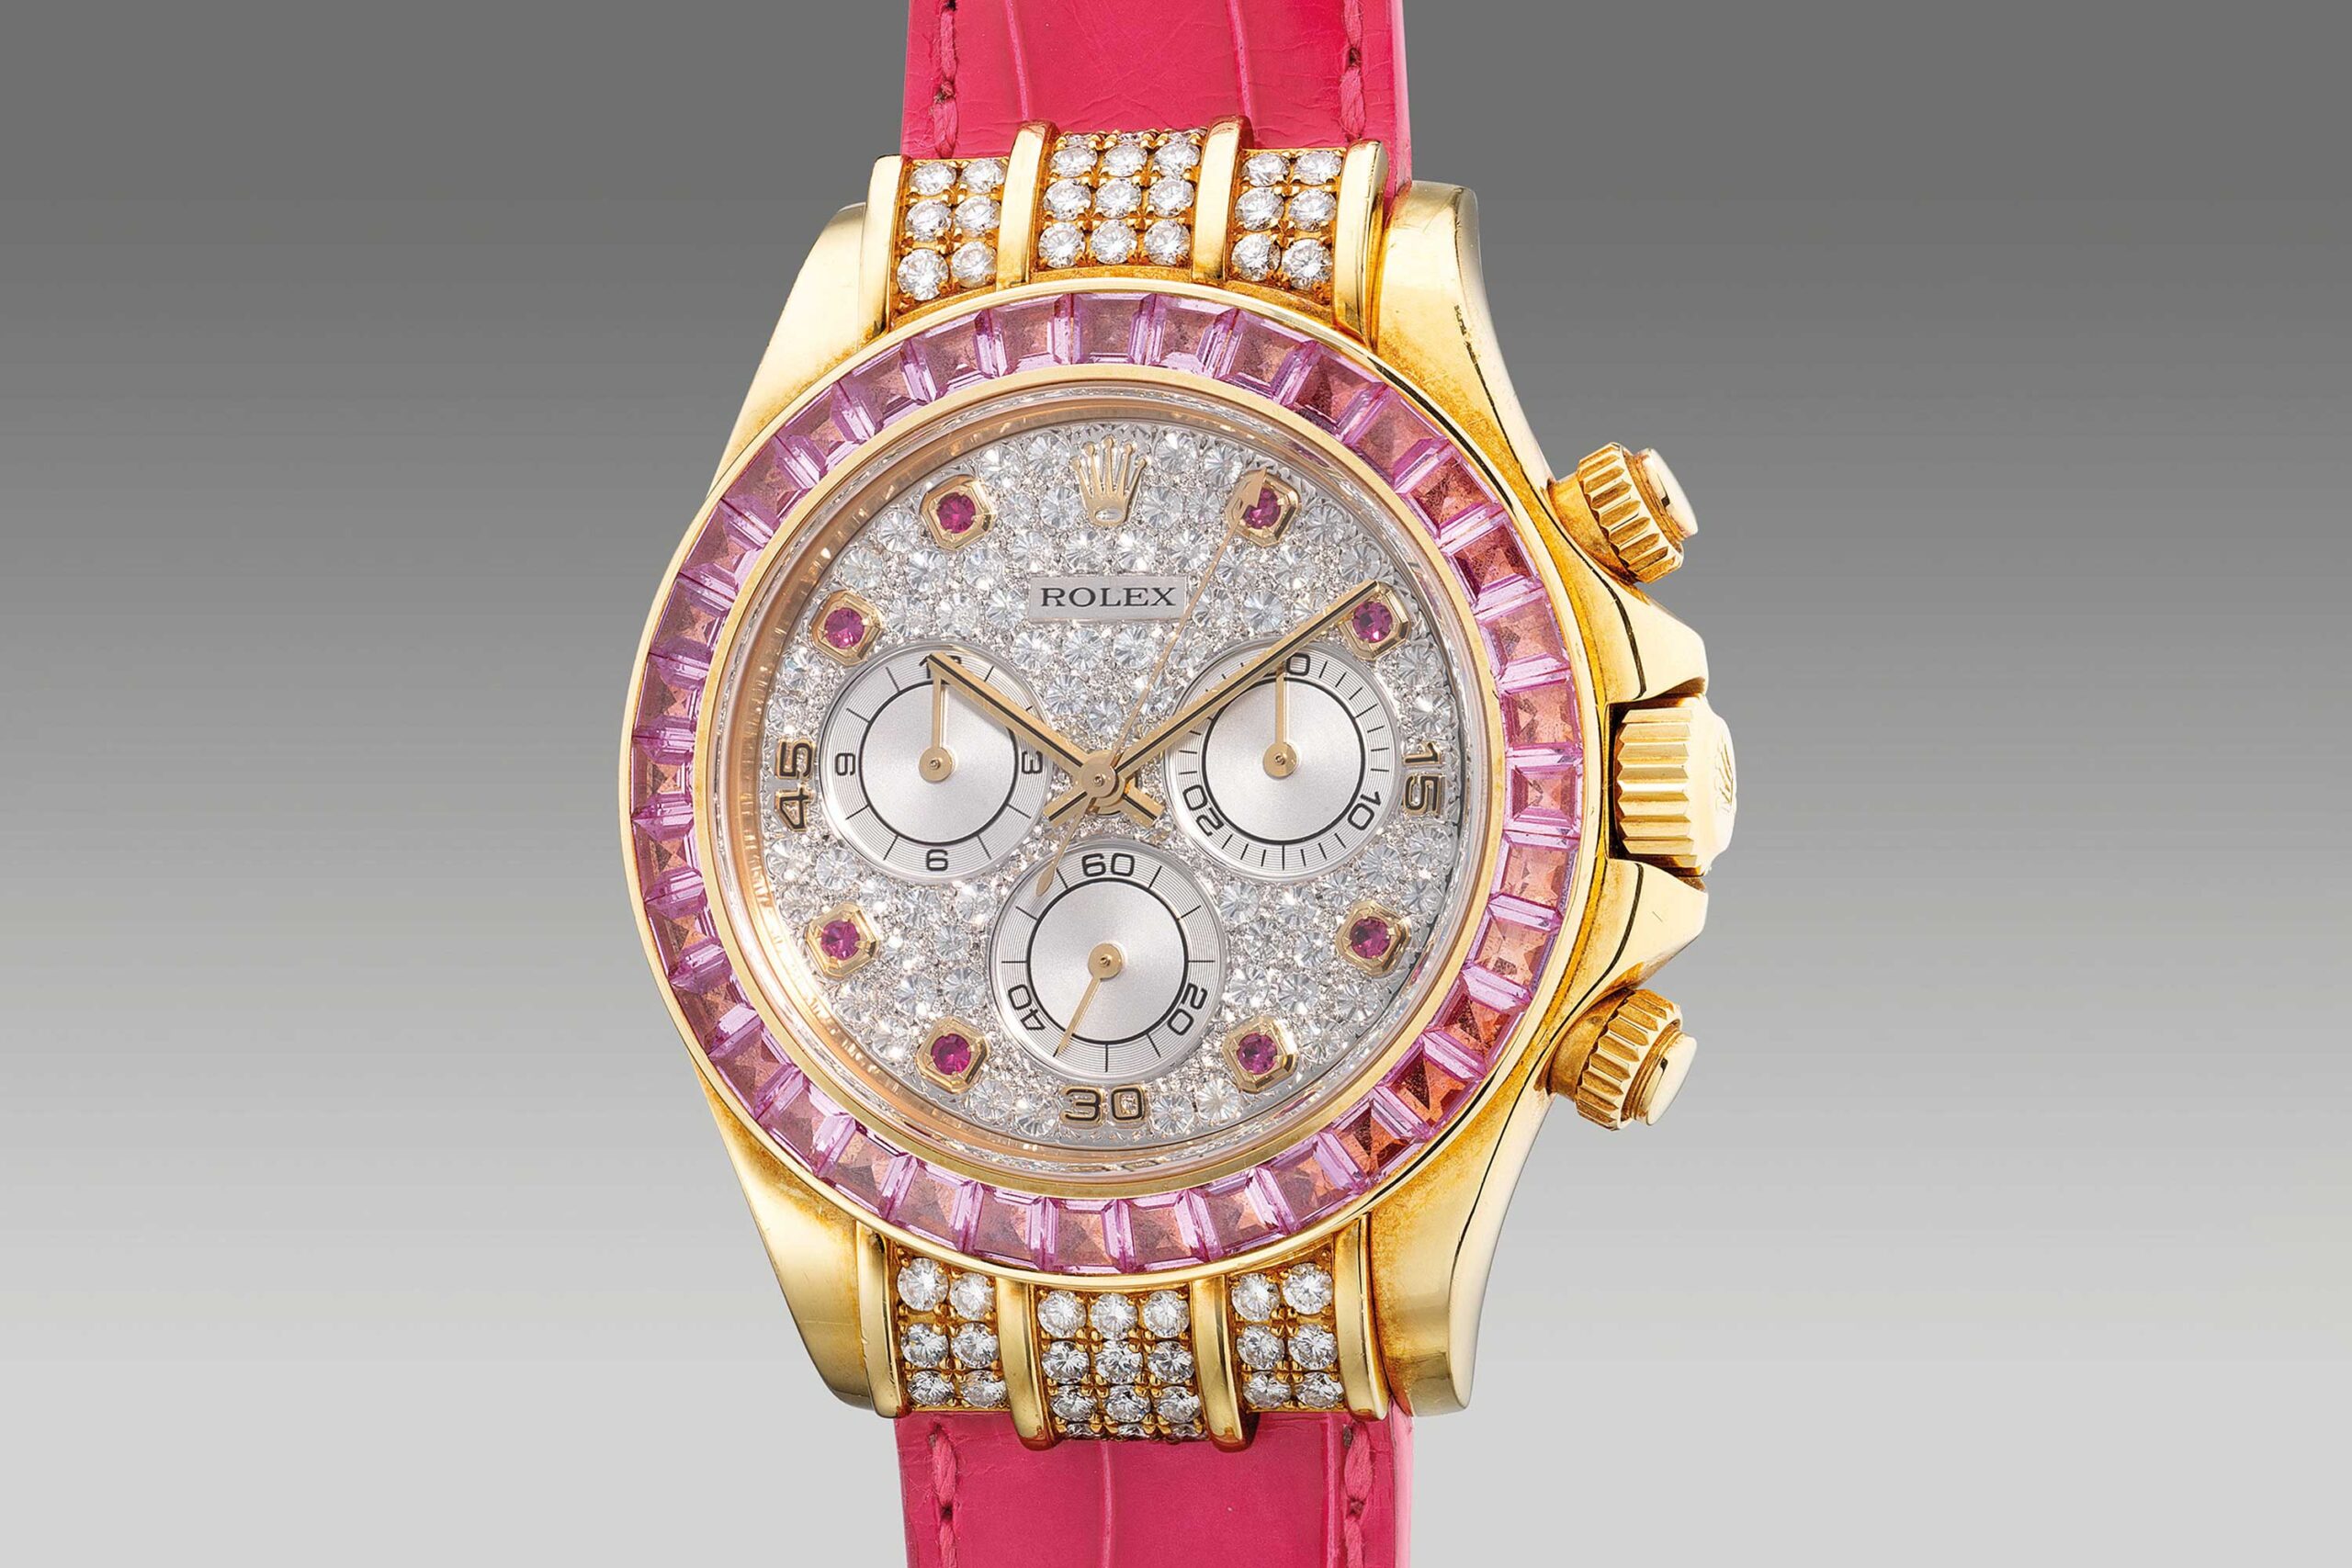 A Rose by Any Other Name – Uber Rare Rolex Daytona Surfaces at Phillips Hong Kong